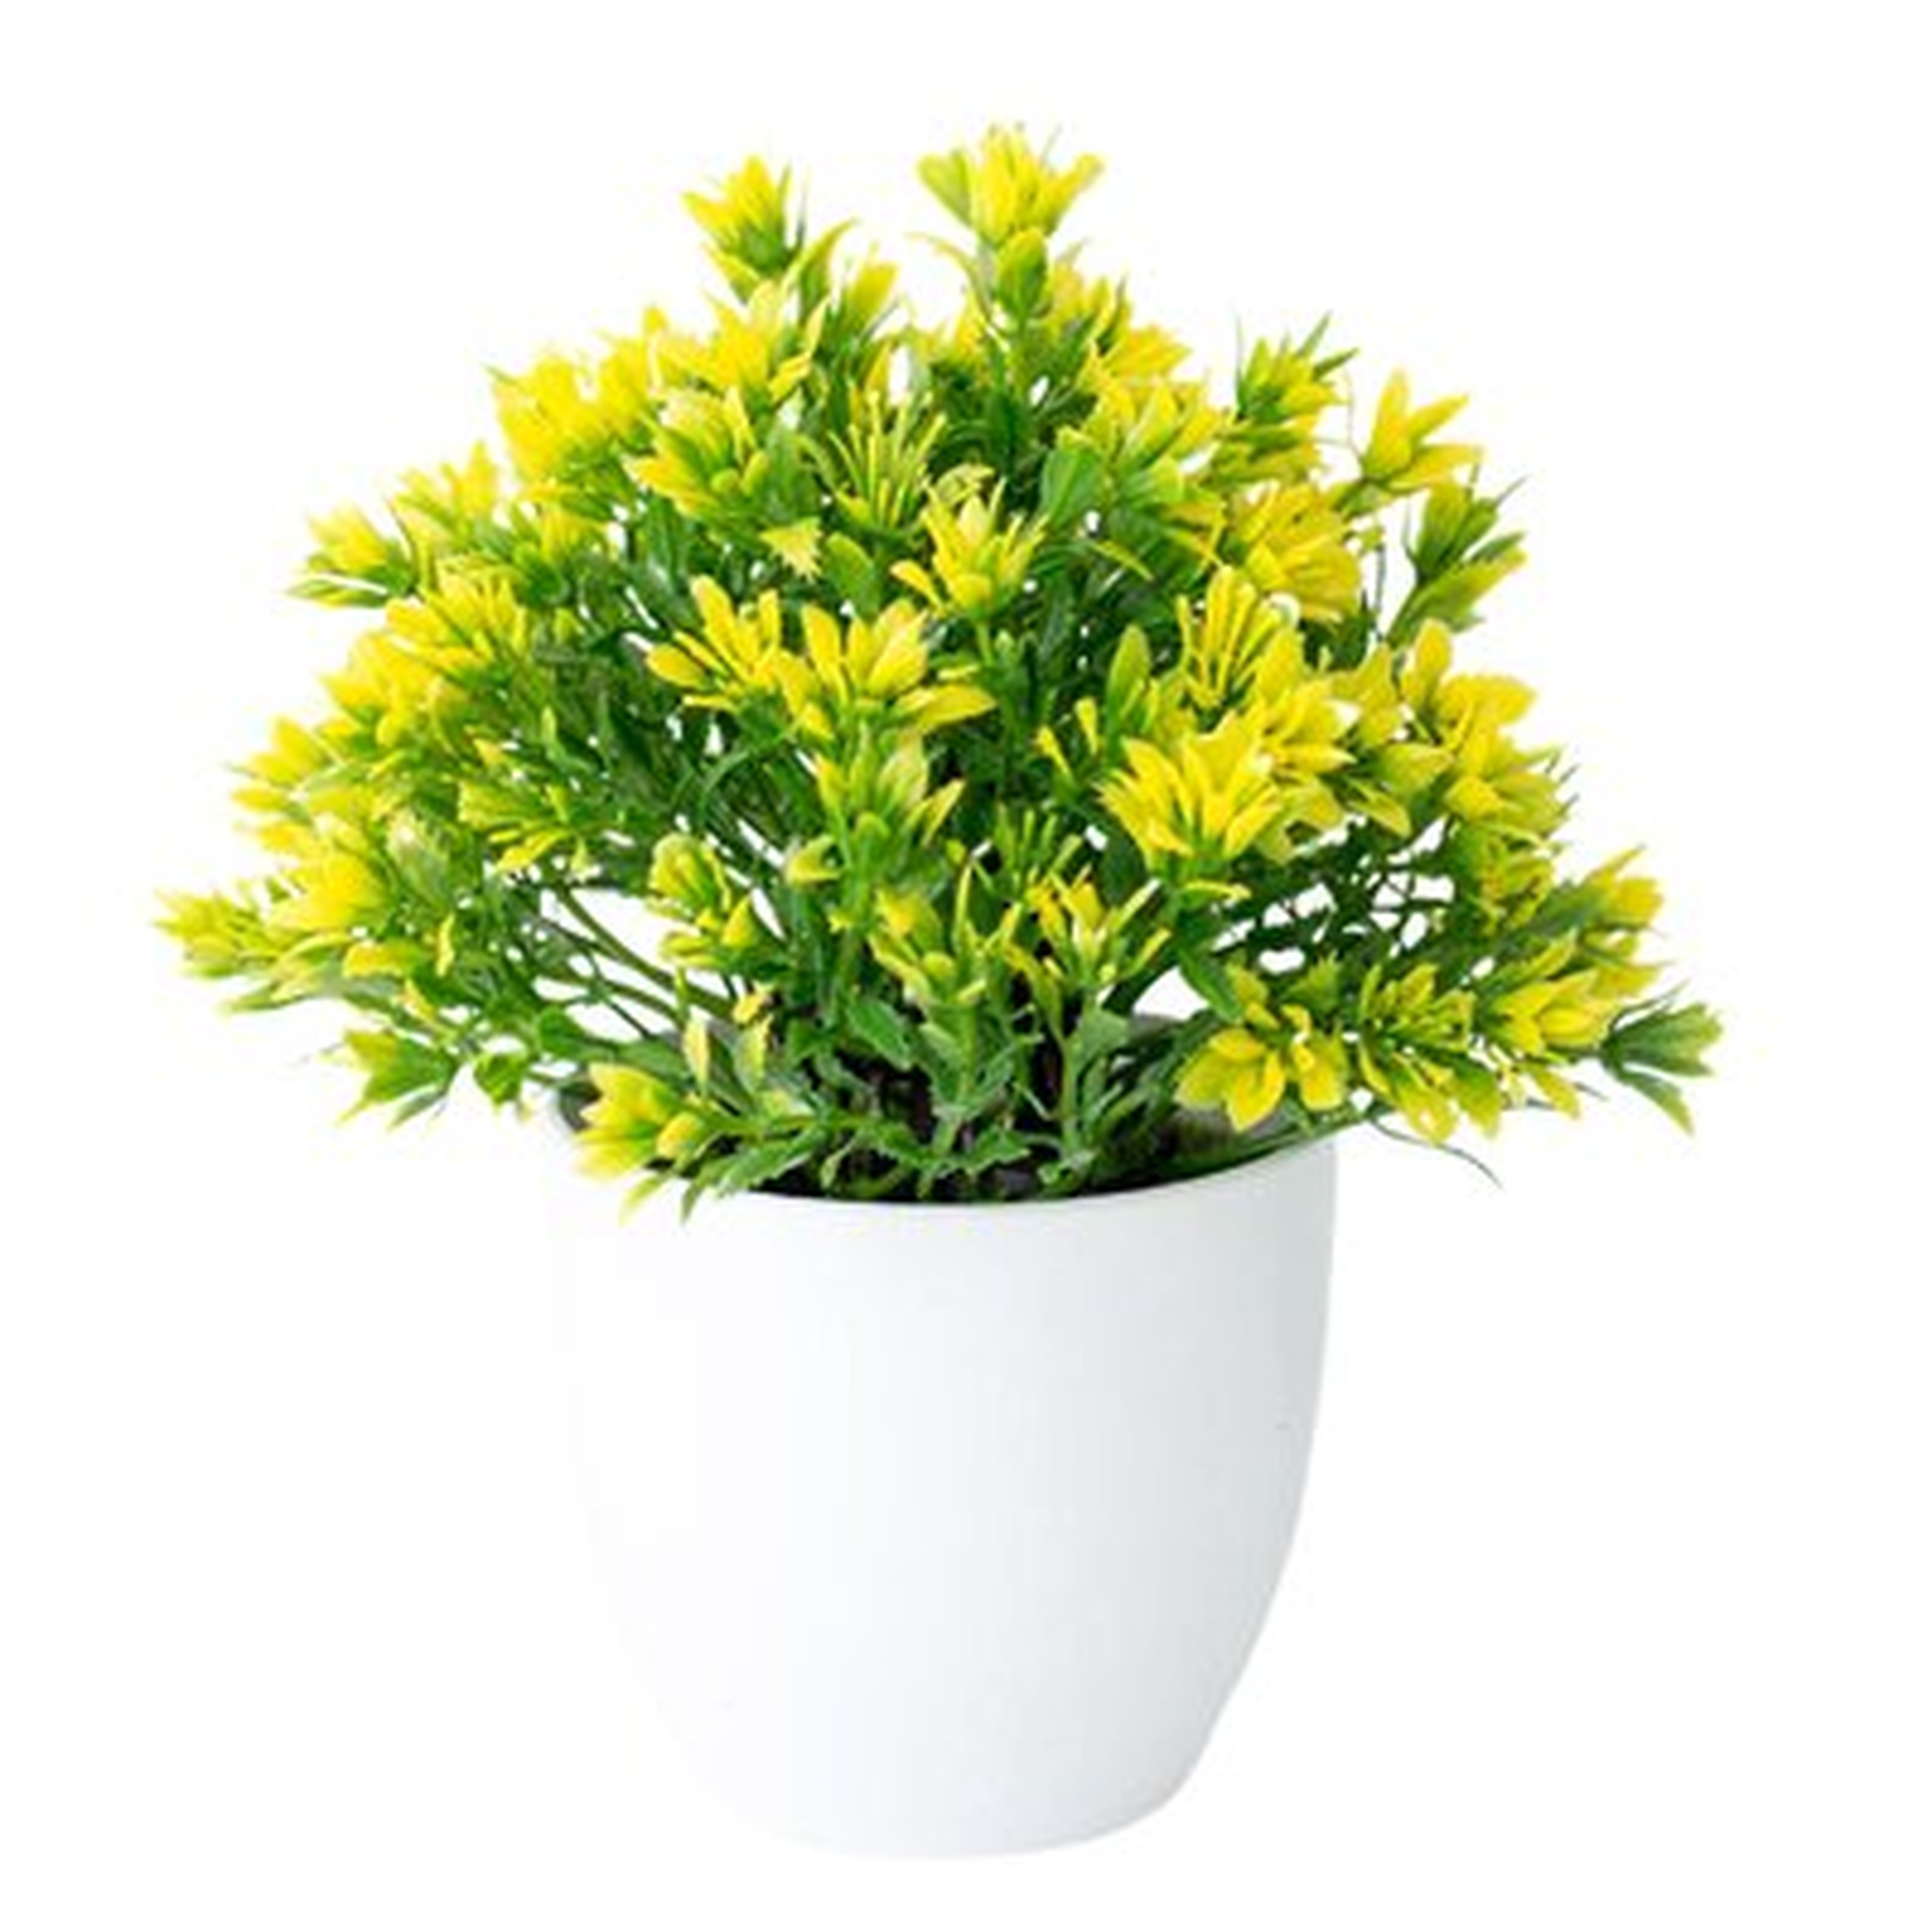 Small Fakes Potted Plants, Mini Artificial Small Flower, Faux Greenery Plants Indoor For Garden Lawn Balcony Office Home Decoration Realistic Simulated Plastic Artificial Potted Flower For Home Decor - Wayfair